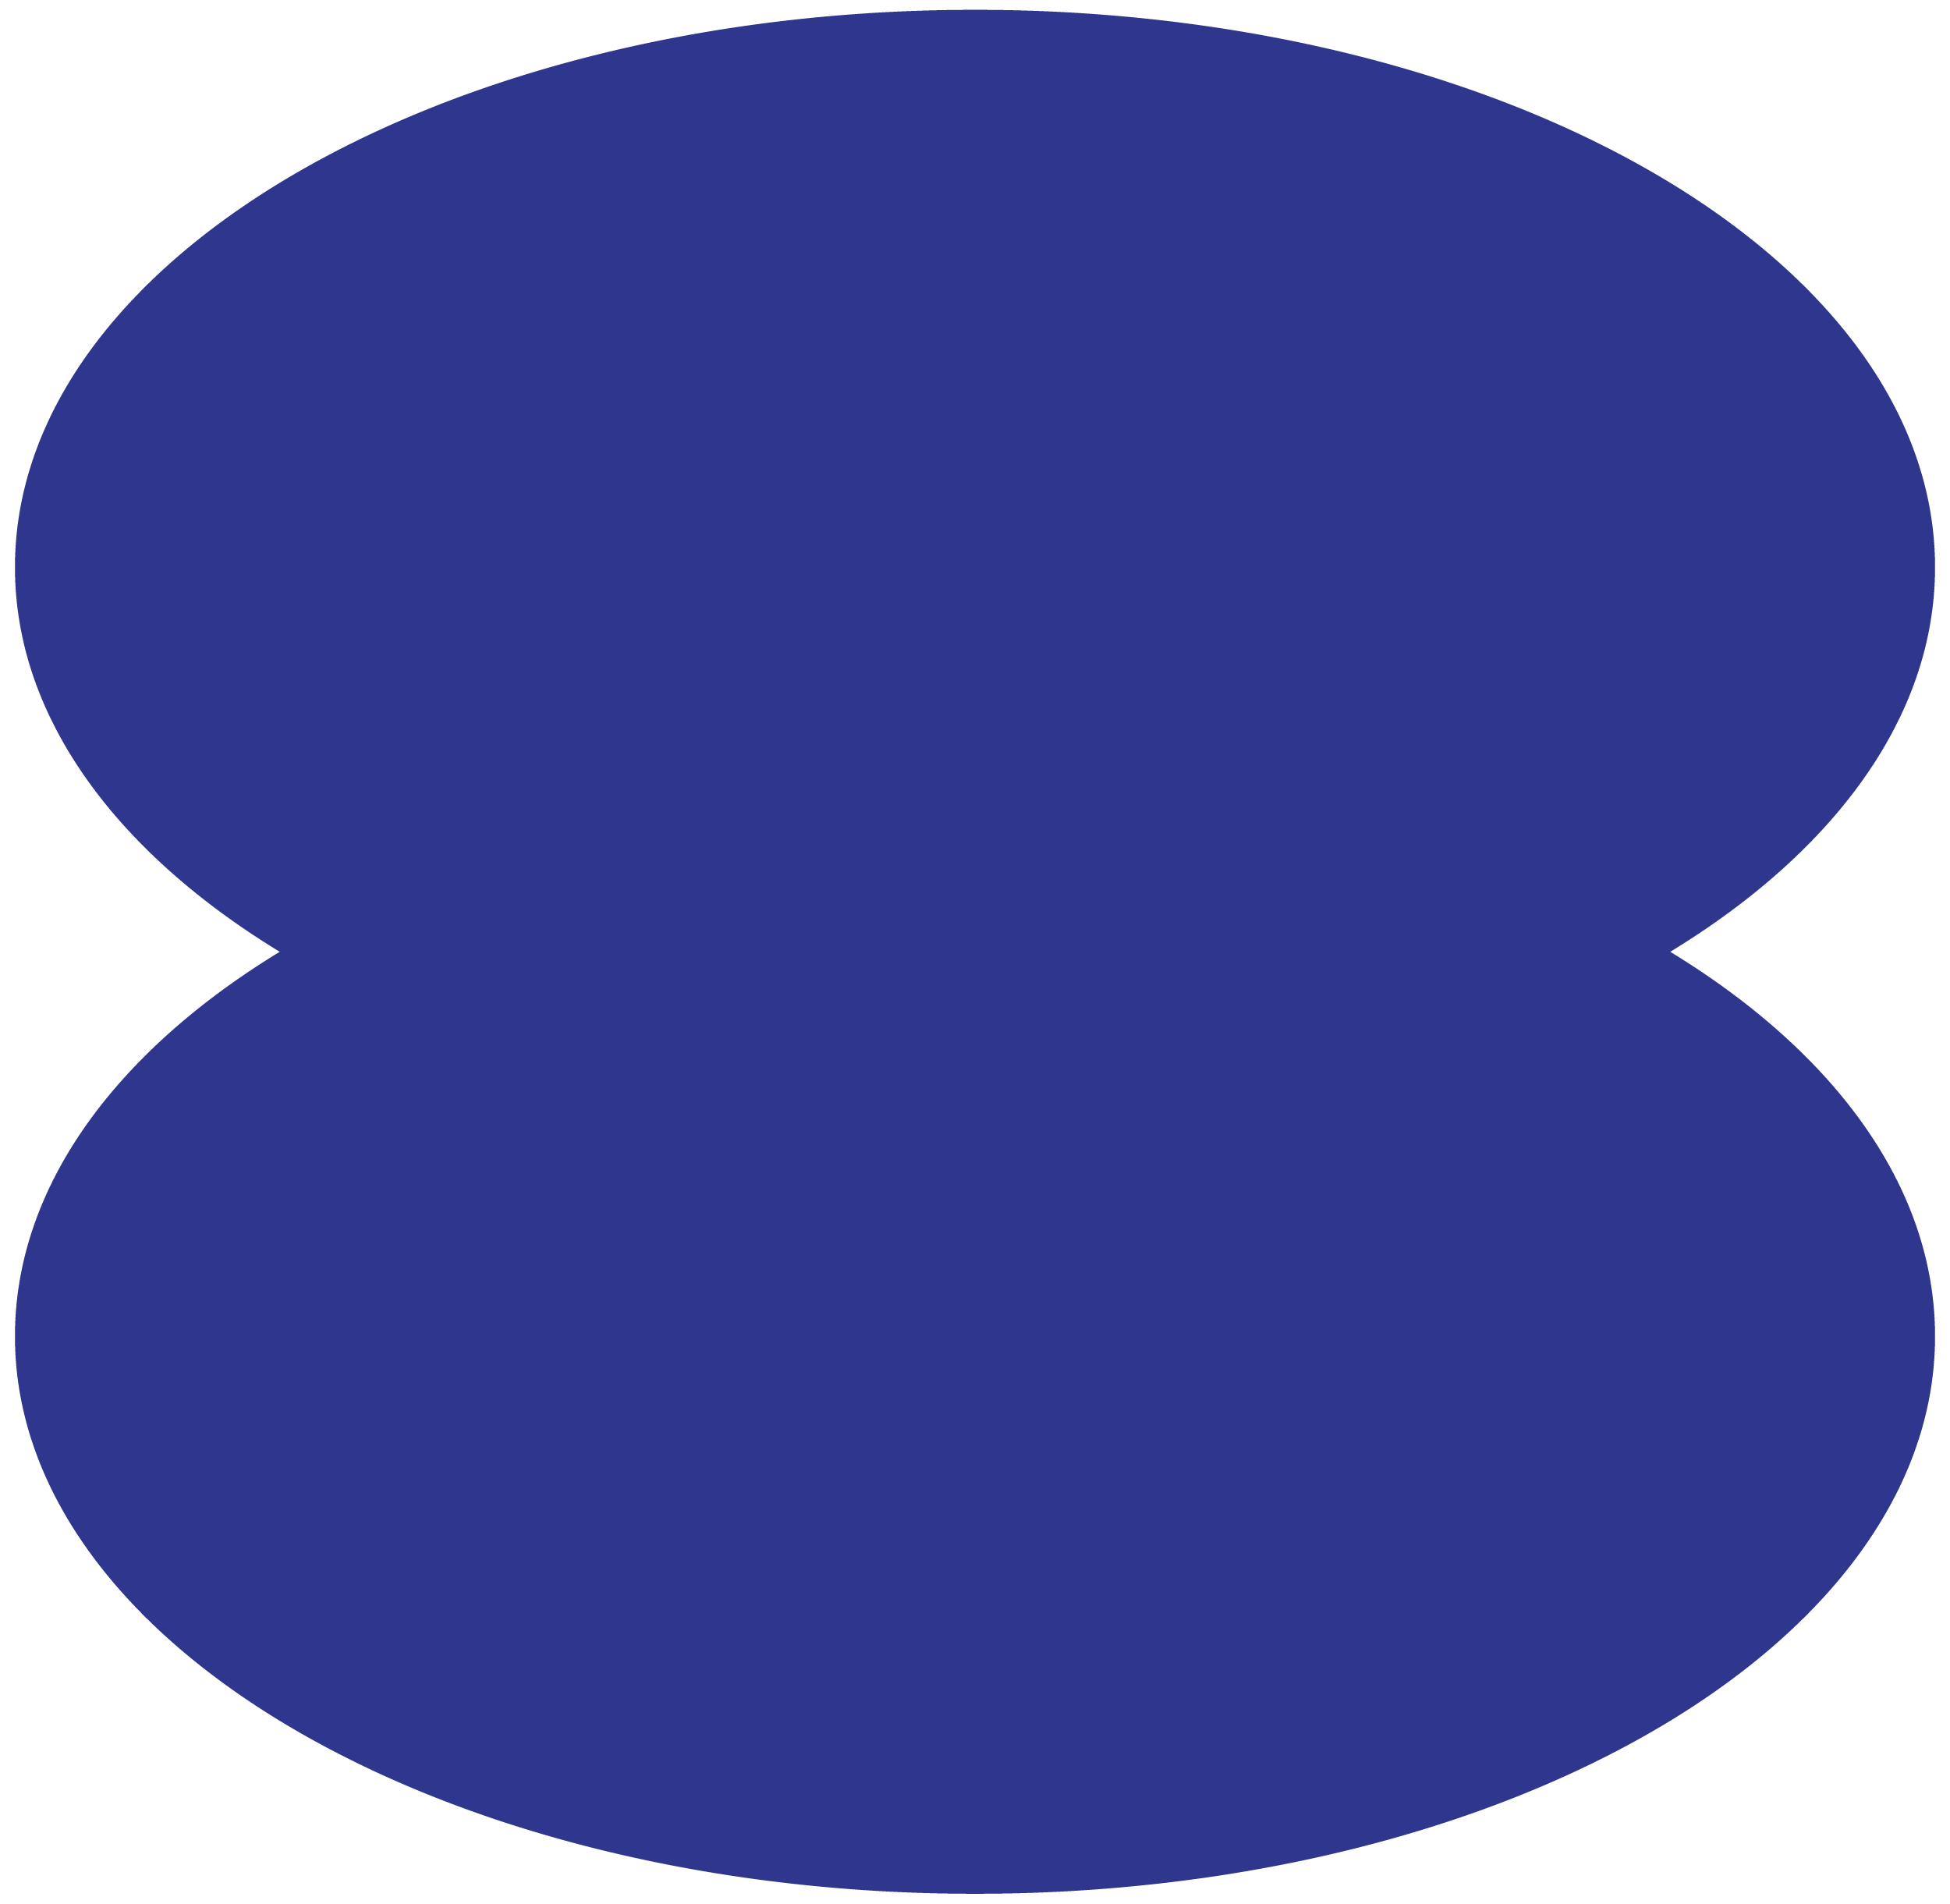 Blue double oval icon